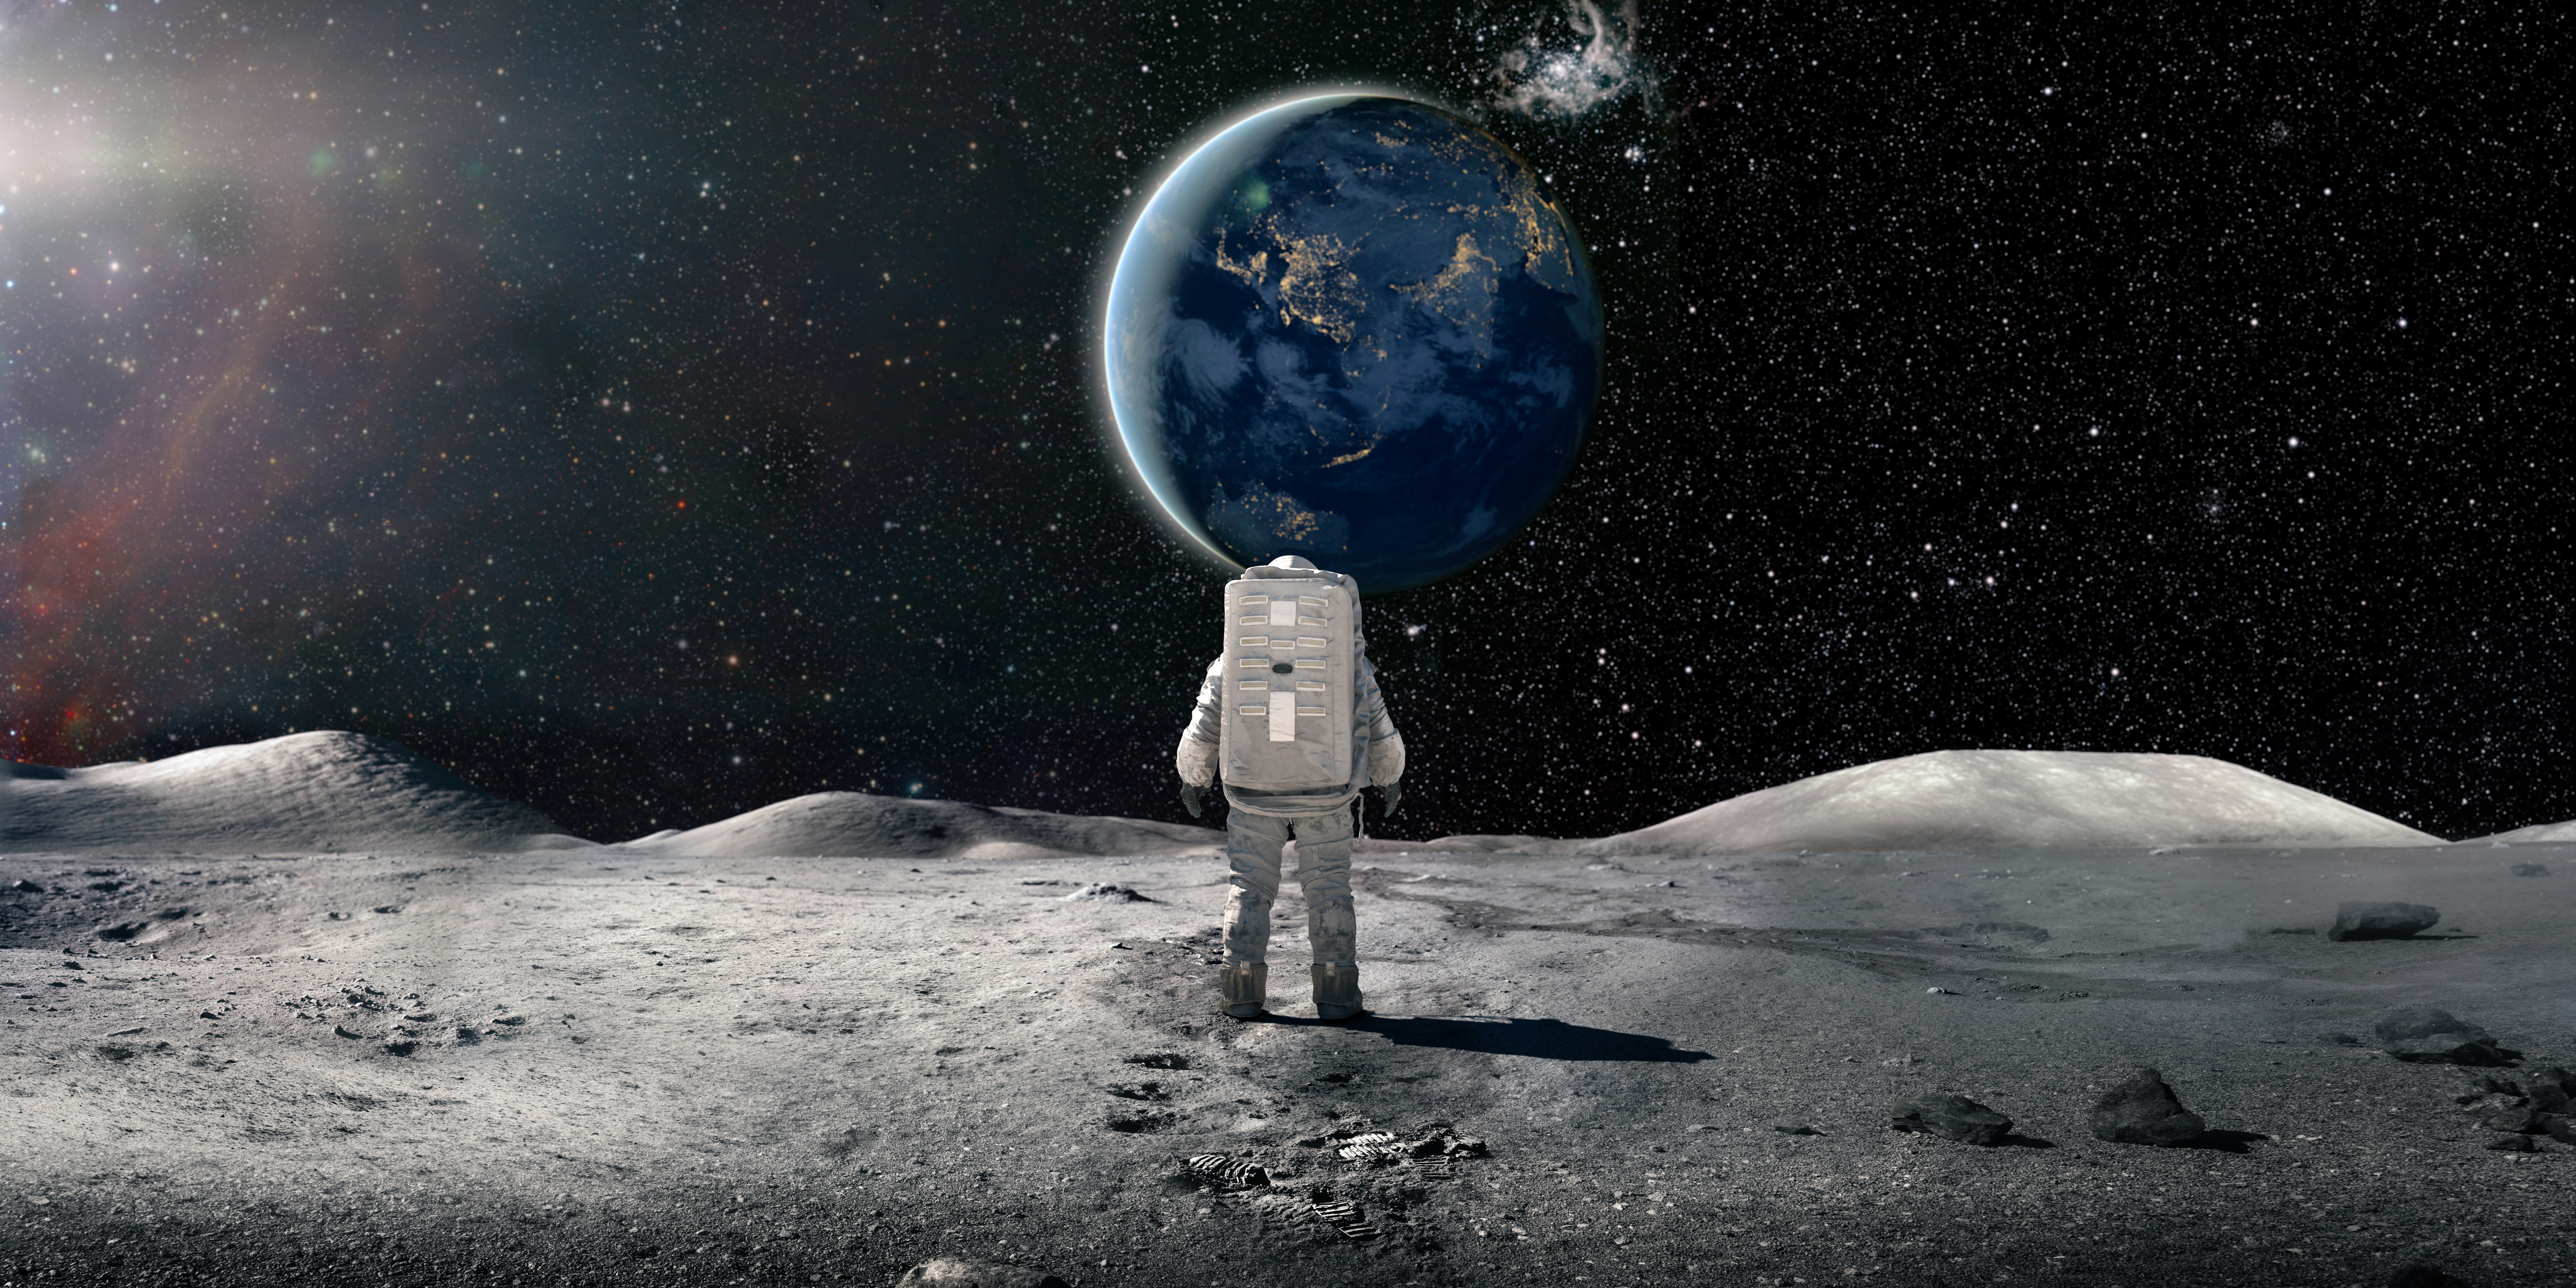 Lone Astronaut In Spacesuit Standing On The Moon Looking At The Distant Earth